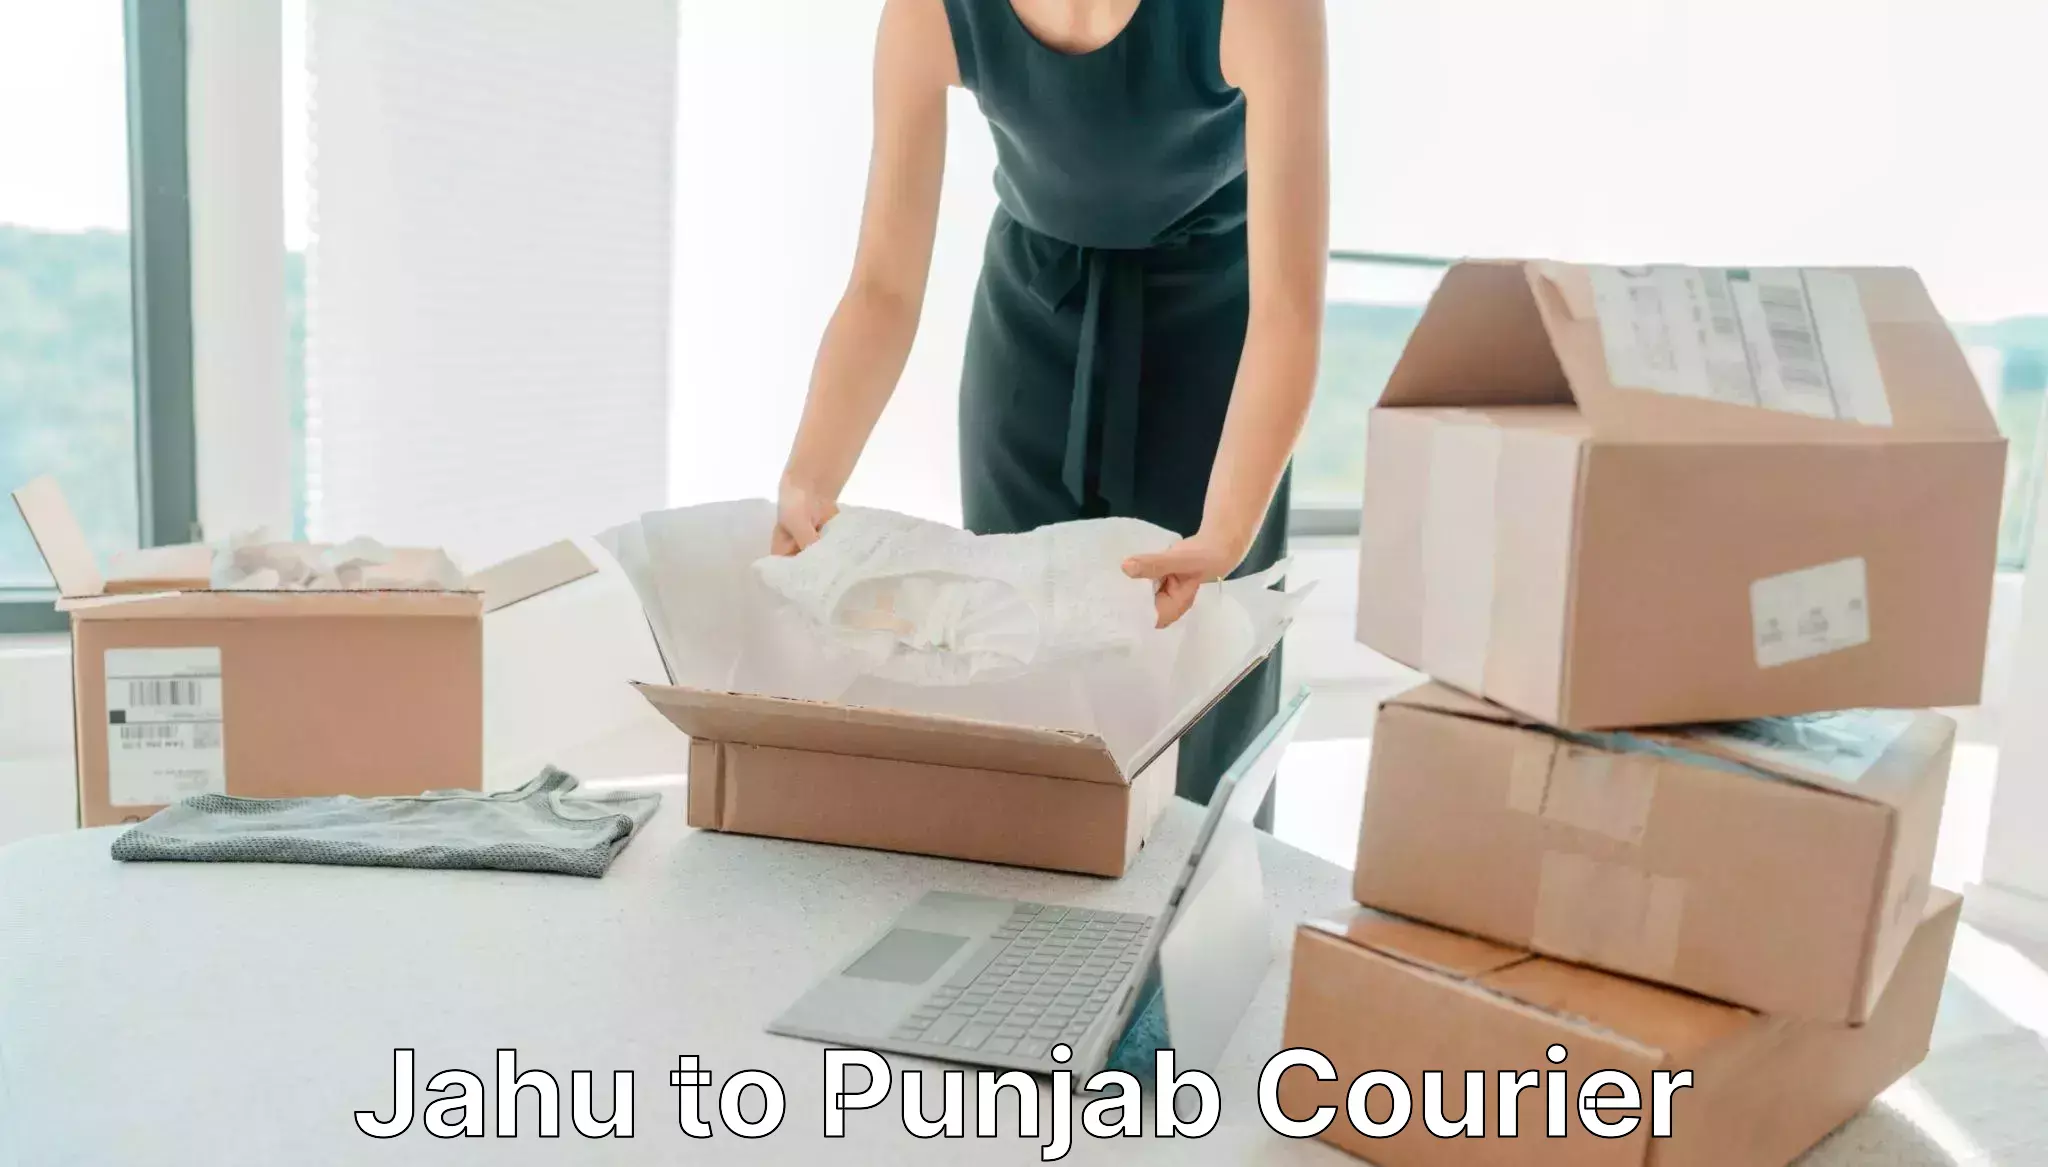 Custom courier packaging Jahu to Amritsar